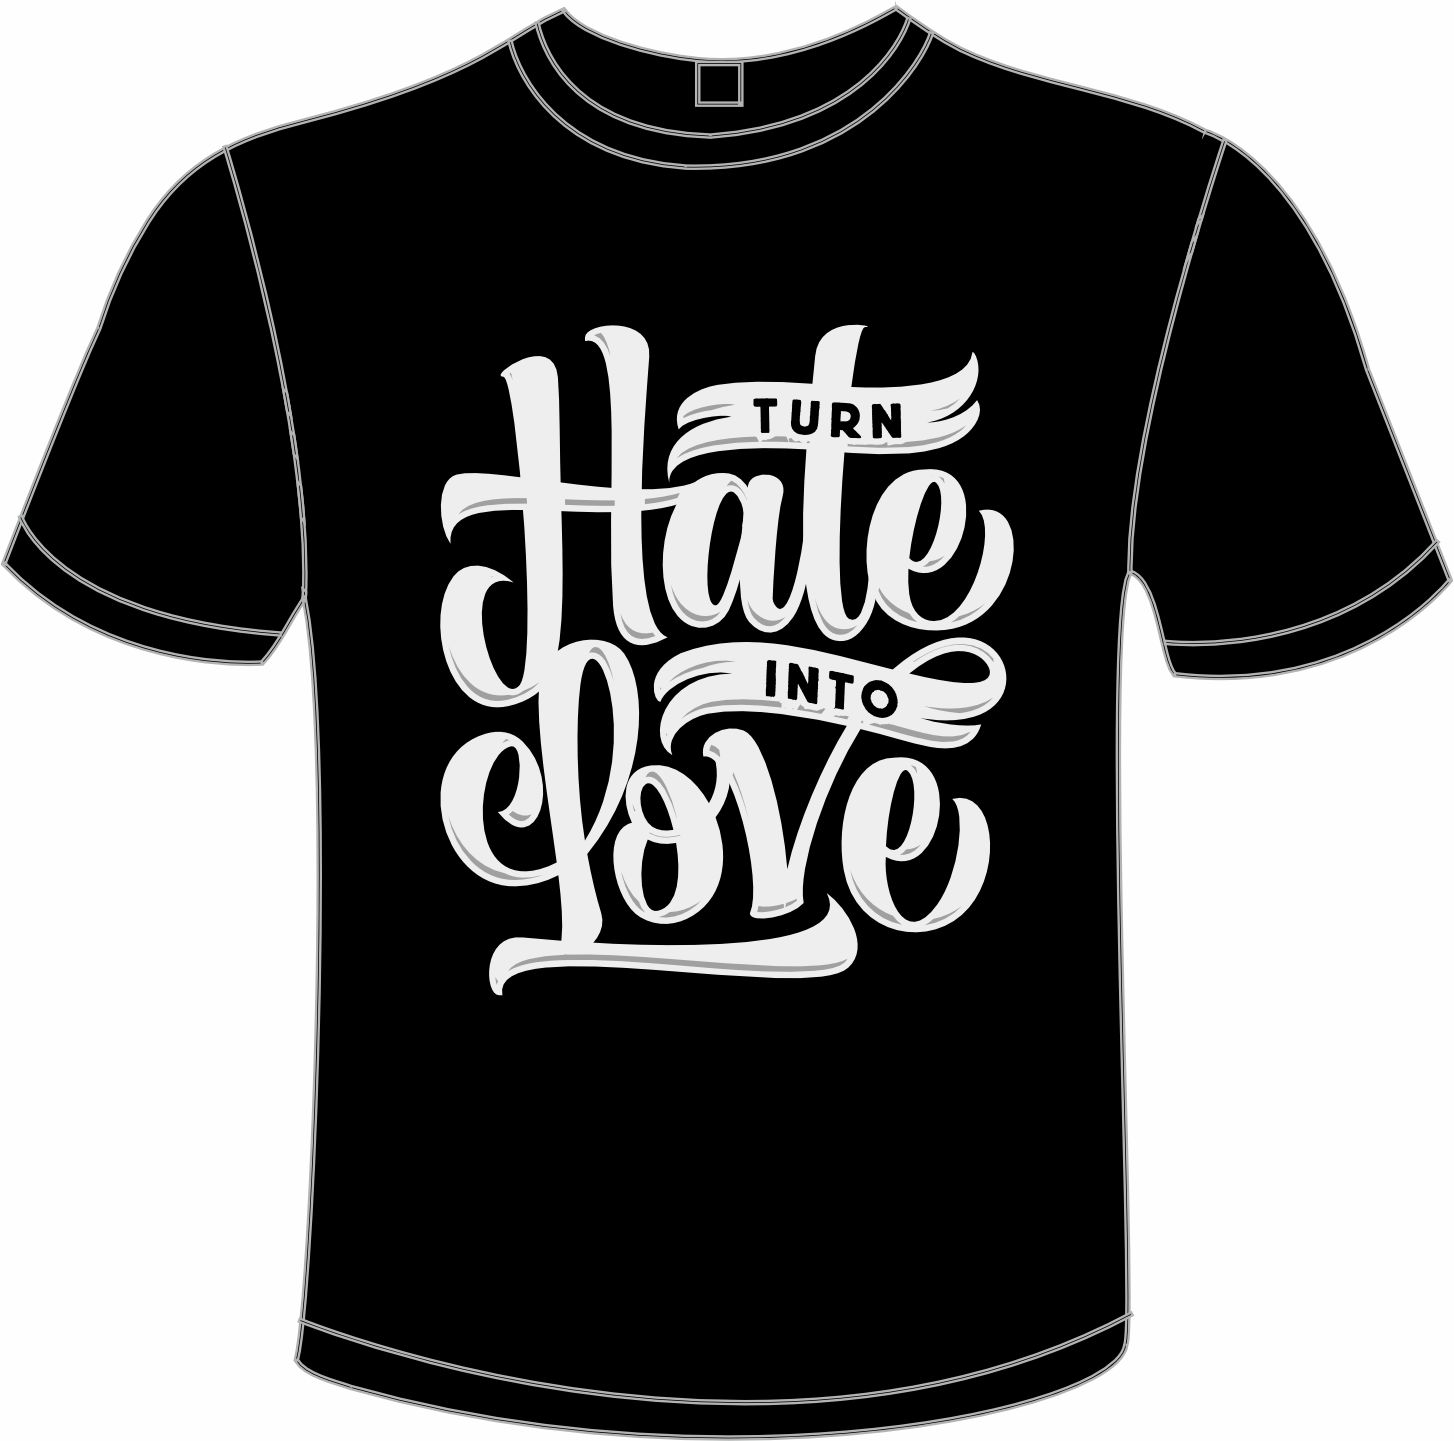 Turn Hate into Love